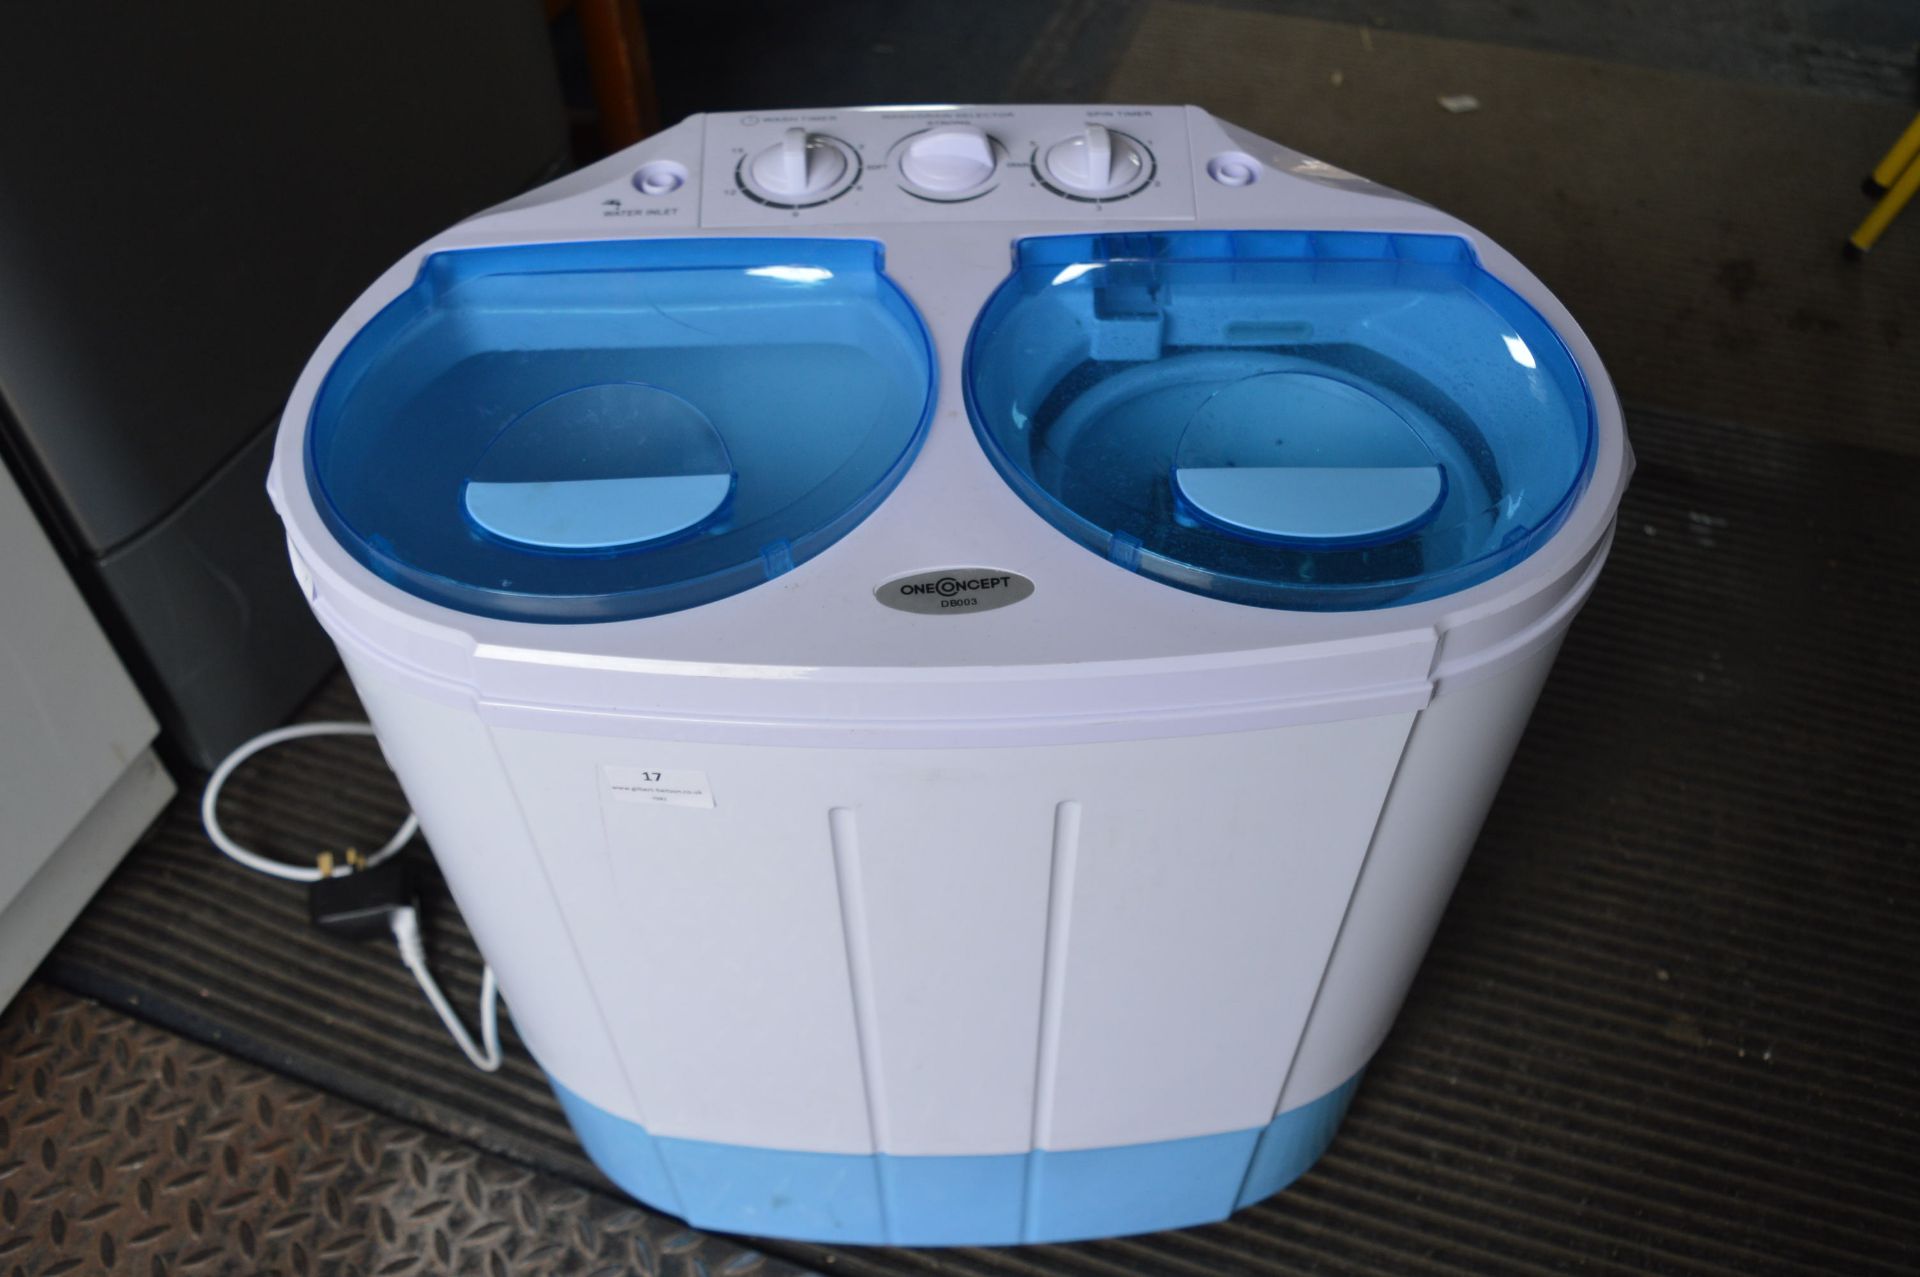 One Concept Double Washing Machine 2kg Capacity